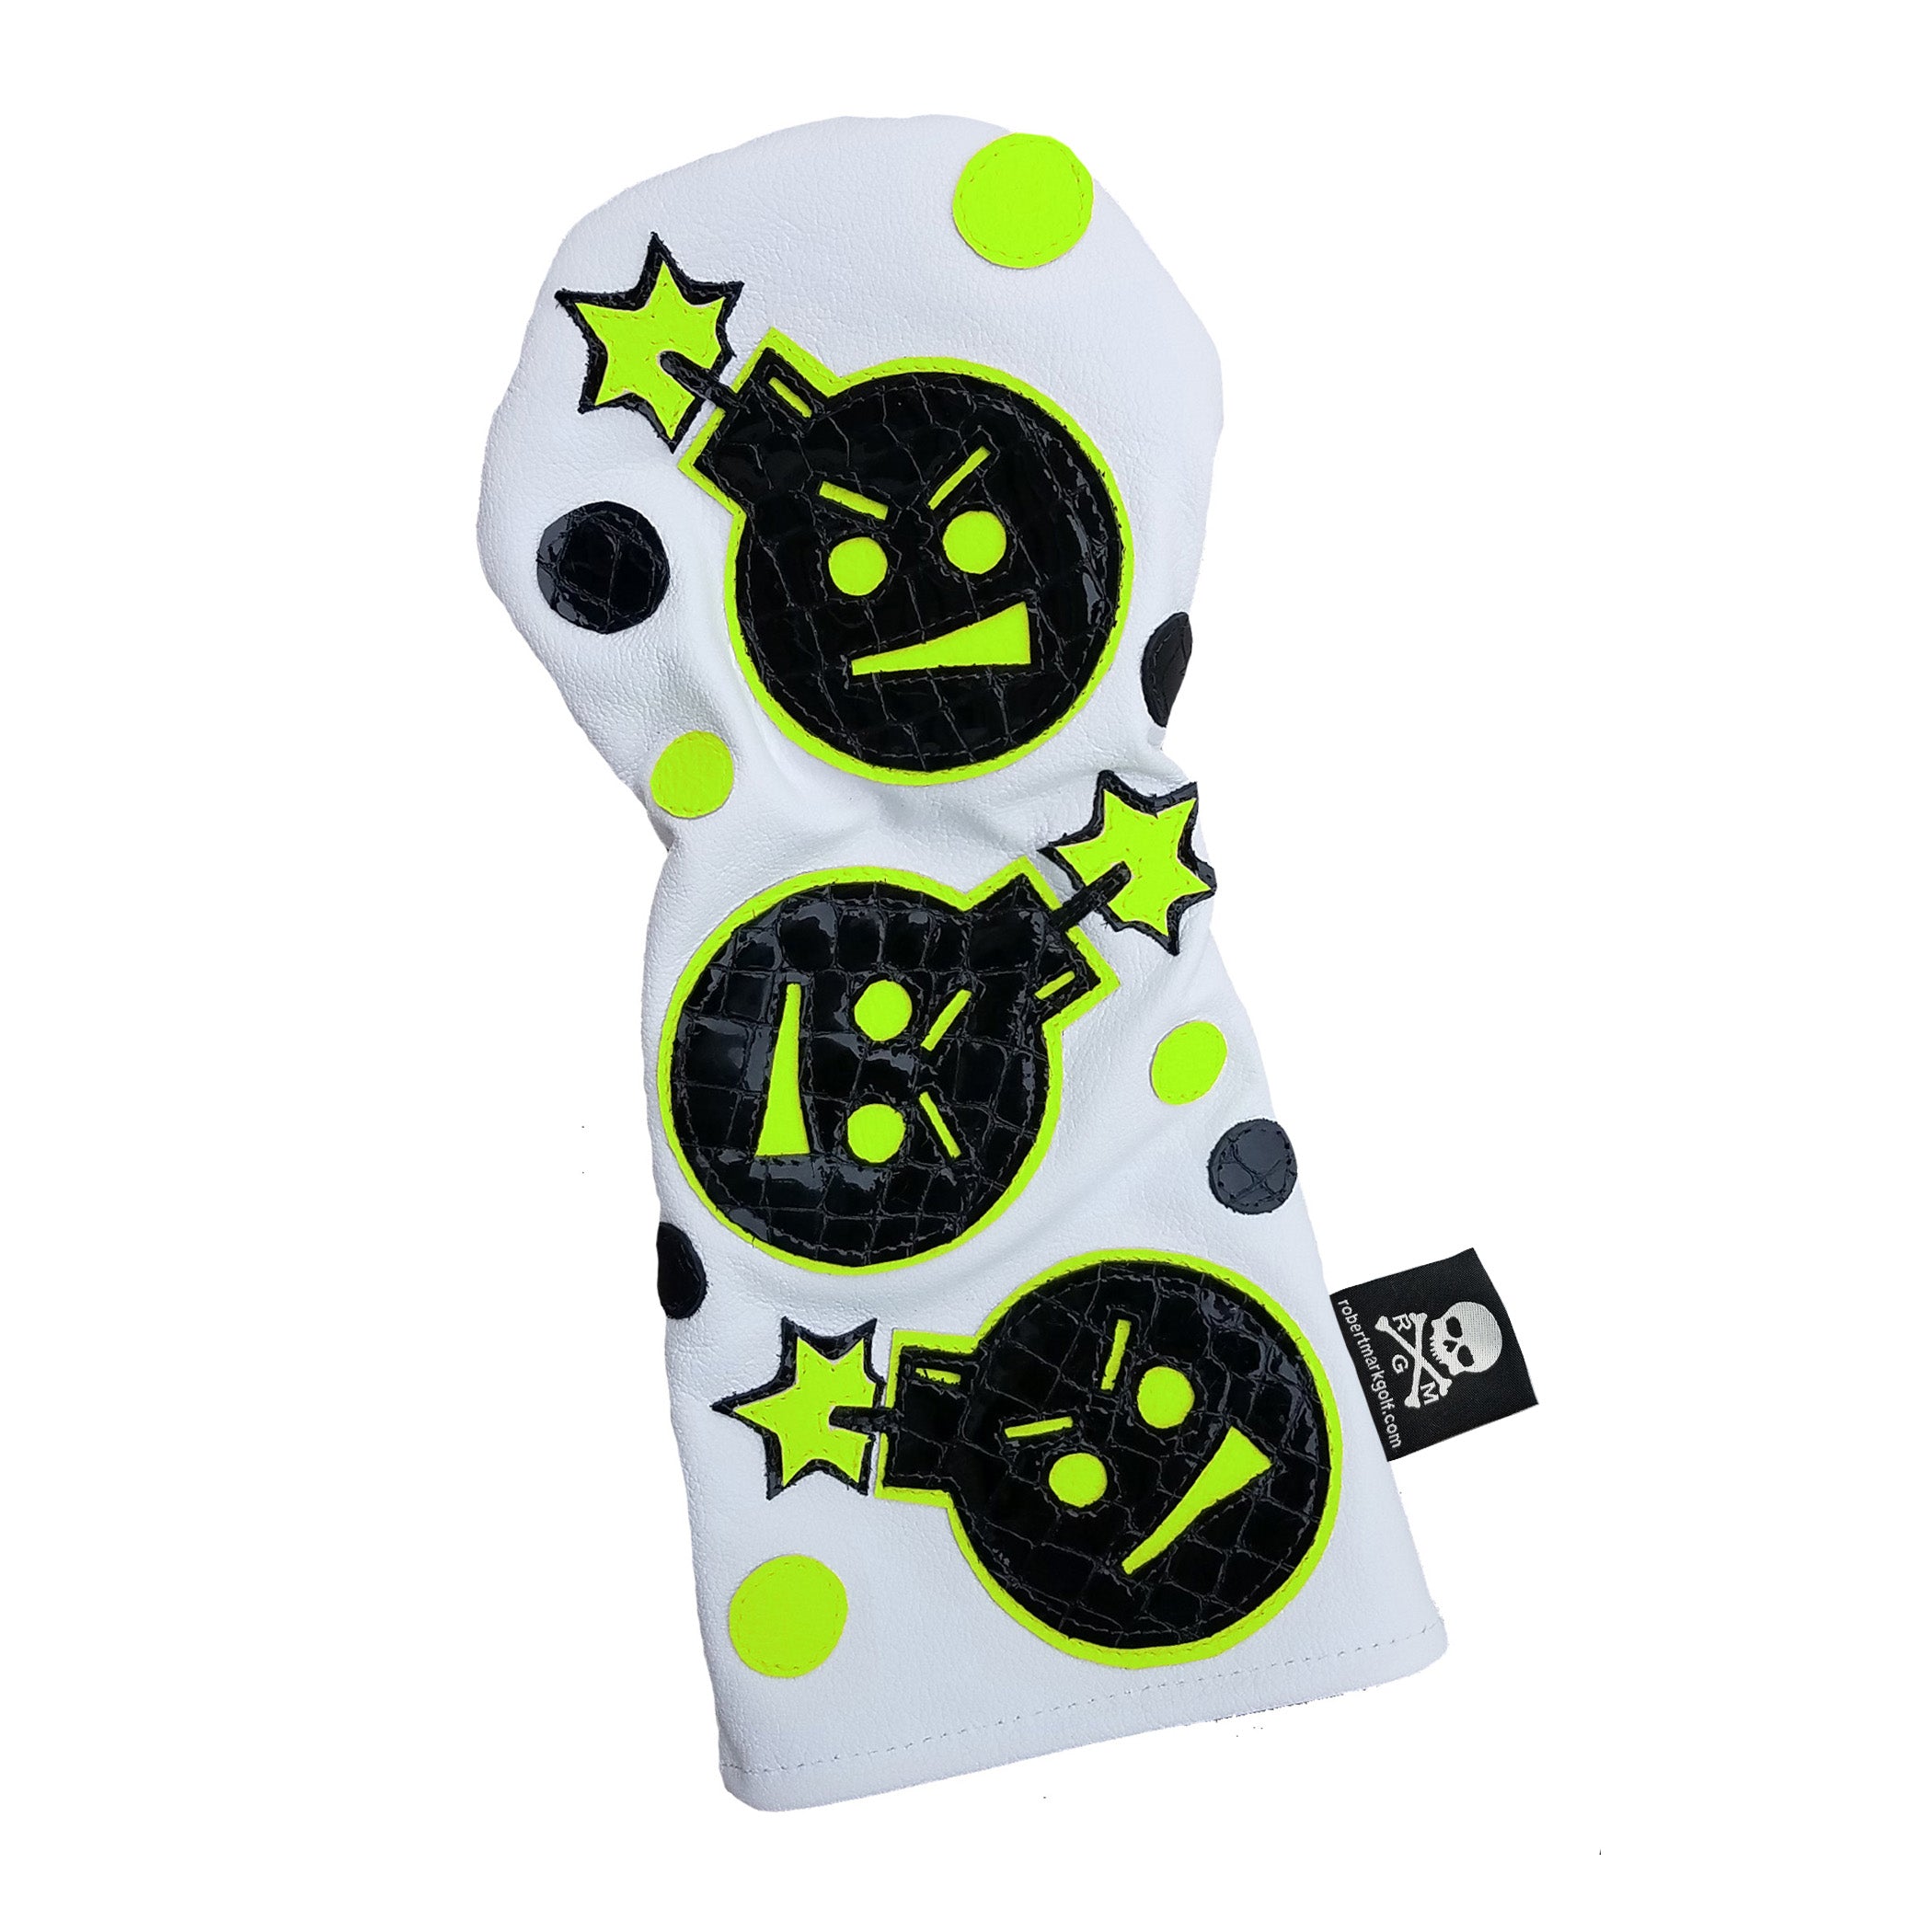 NEW! The Dancing "Angry Bomb" Driver Headcover - Robert Mark Golf